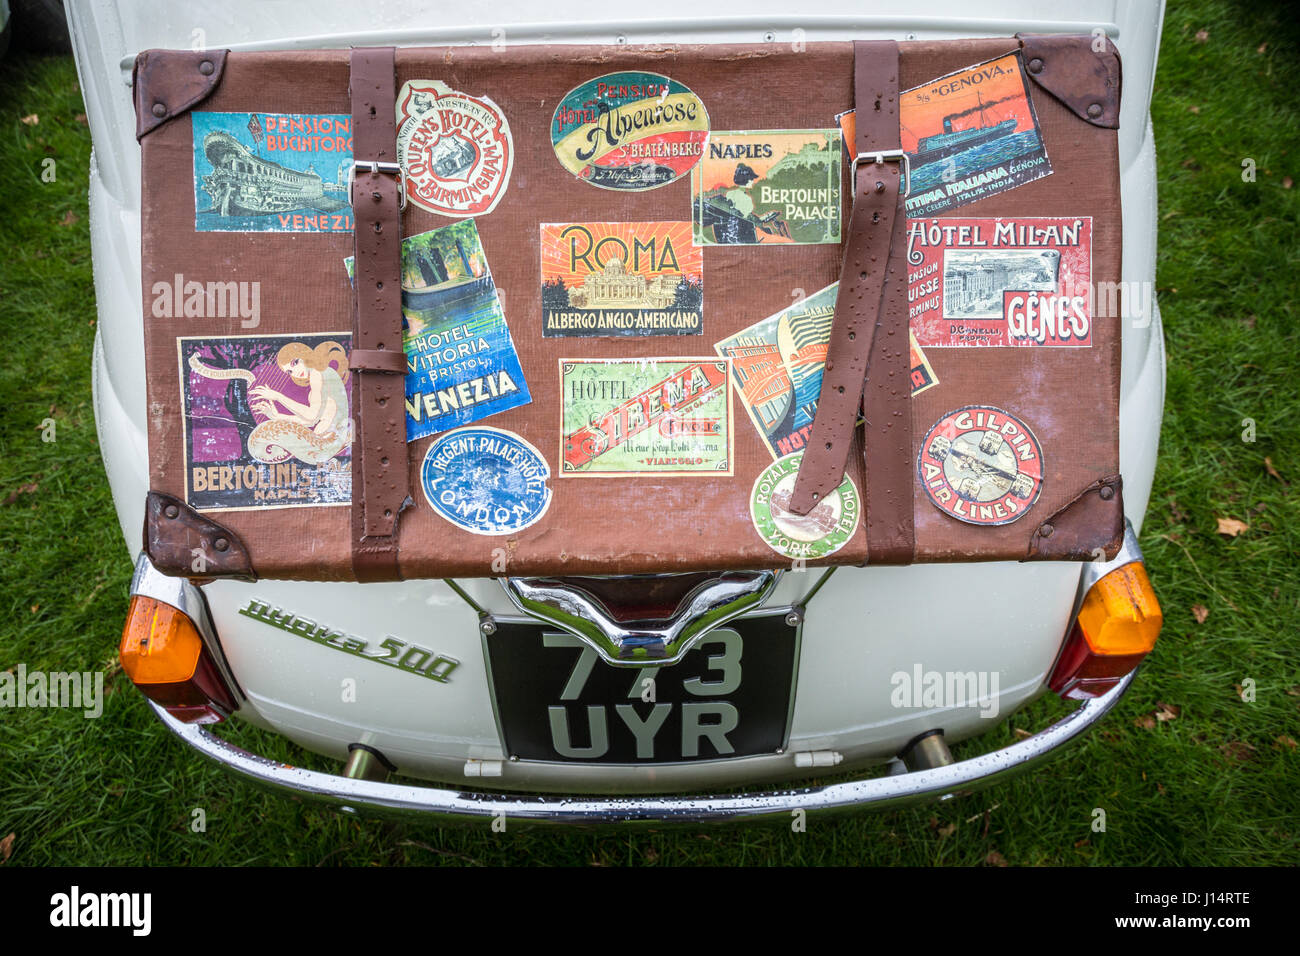 Luggage suitcase atop the boot of a vintage Fiat 500 car Stock Photo